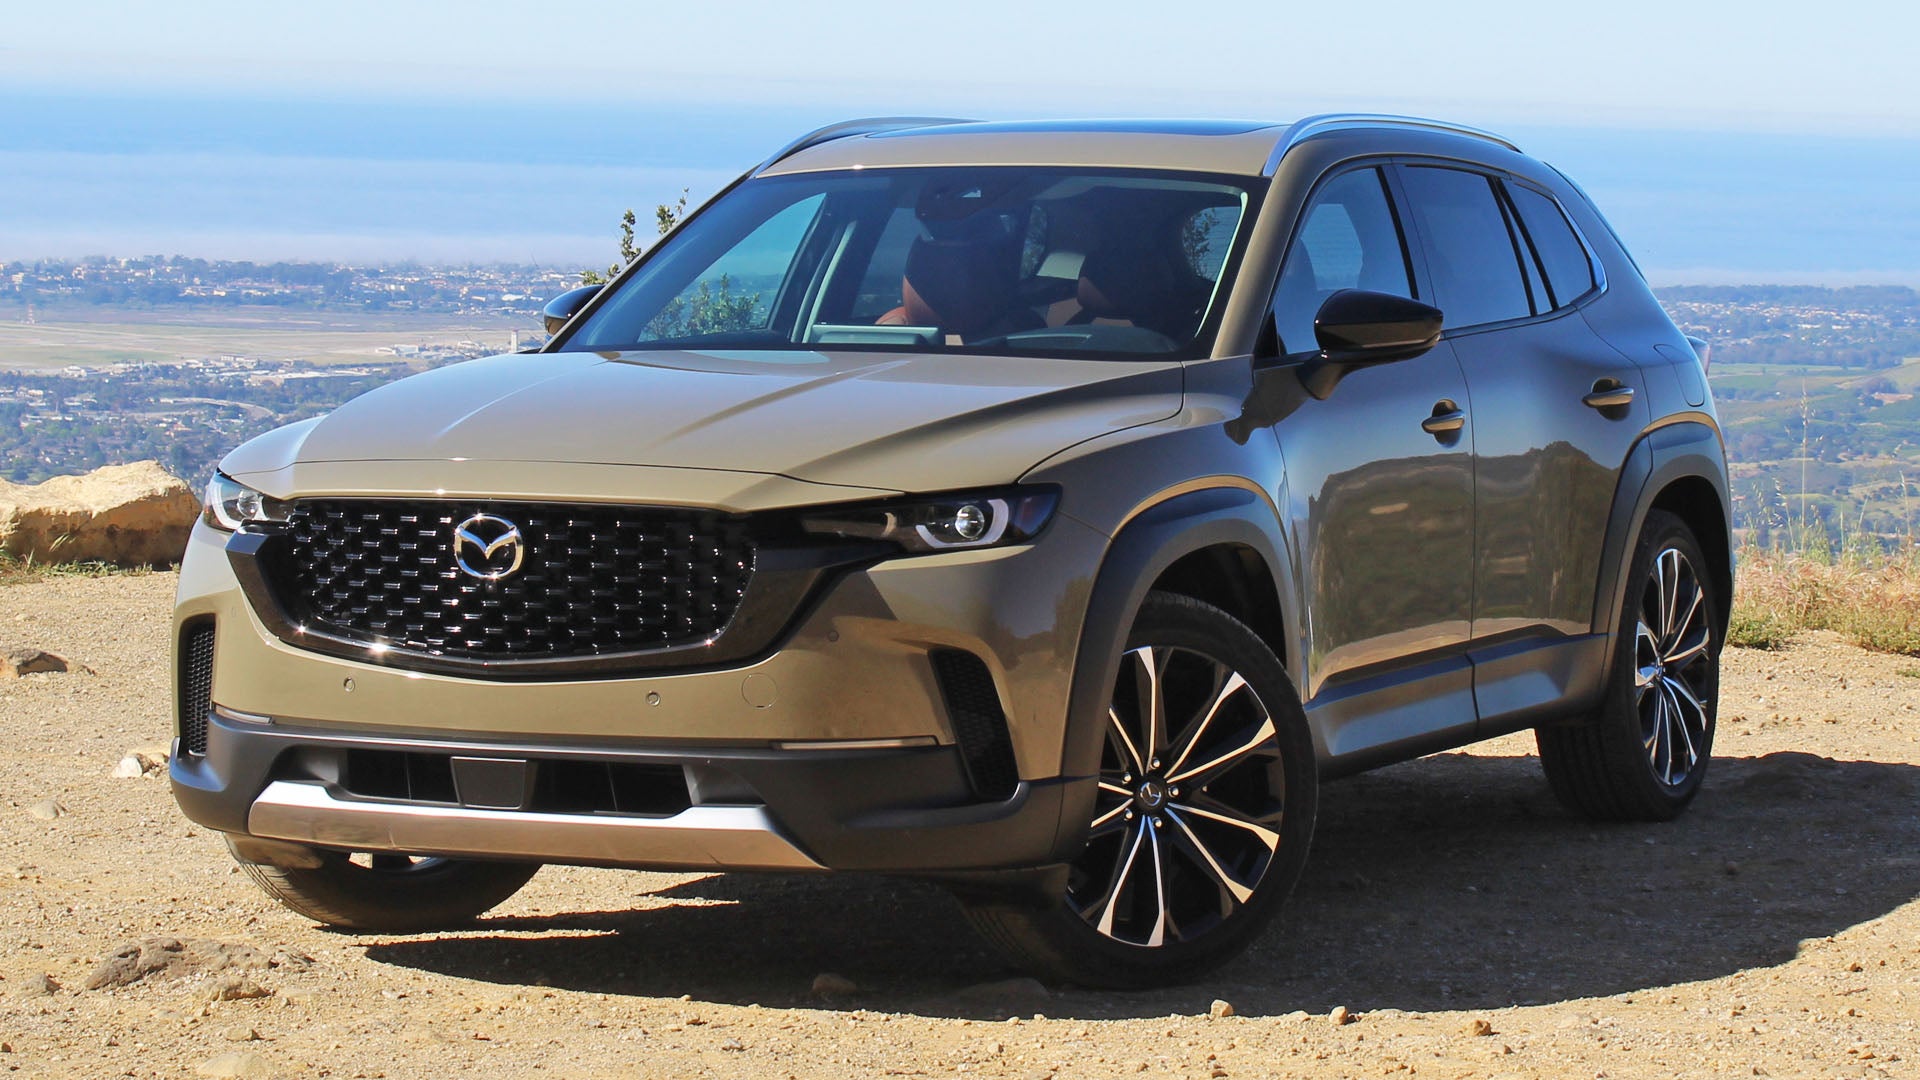 New 2023 Mazda CX-50 for Europe Unveiled